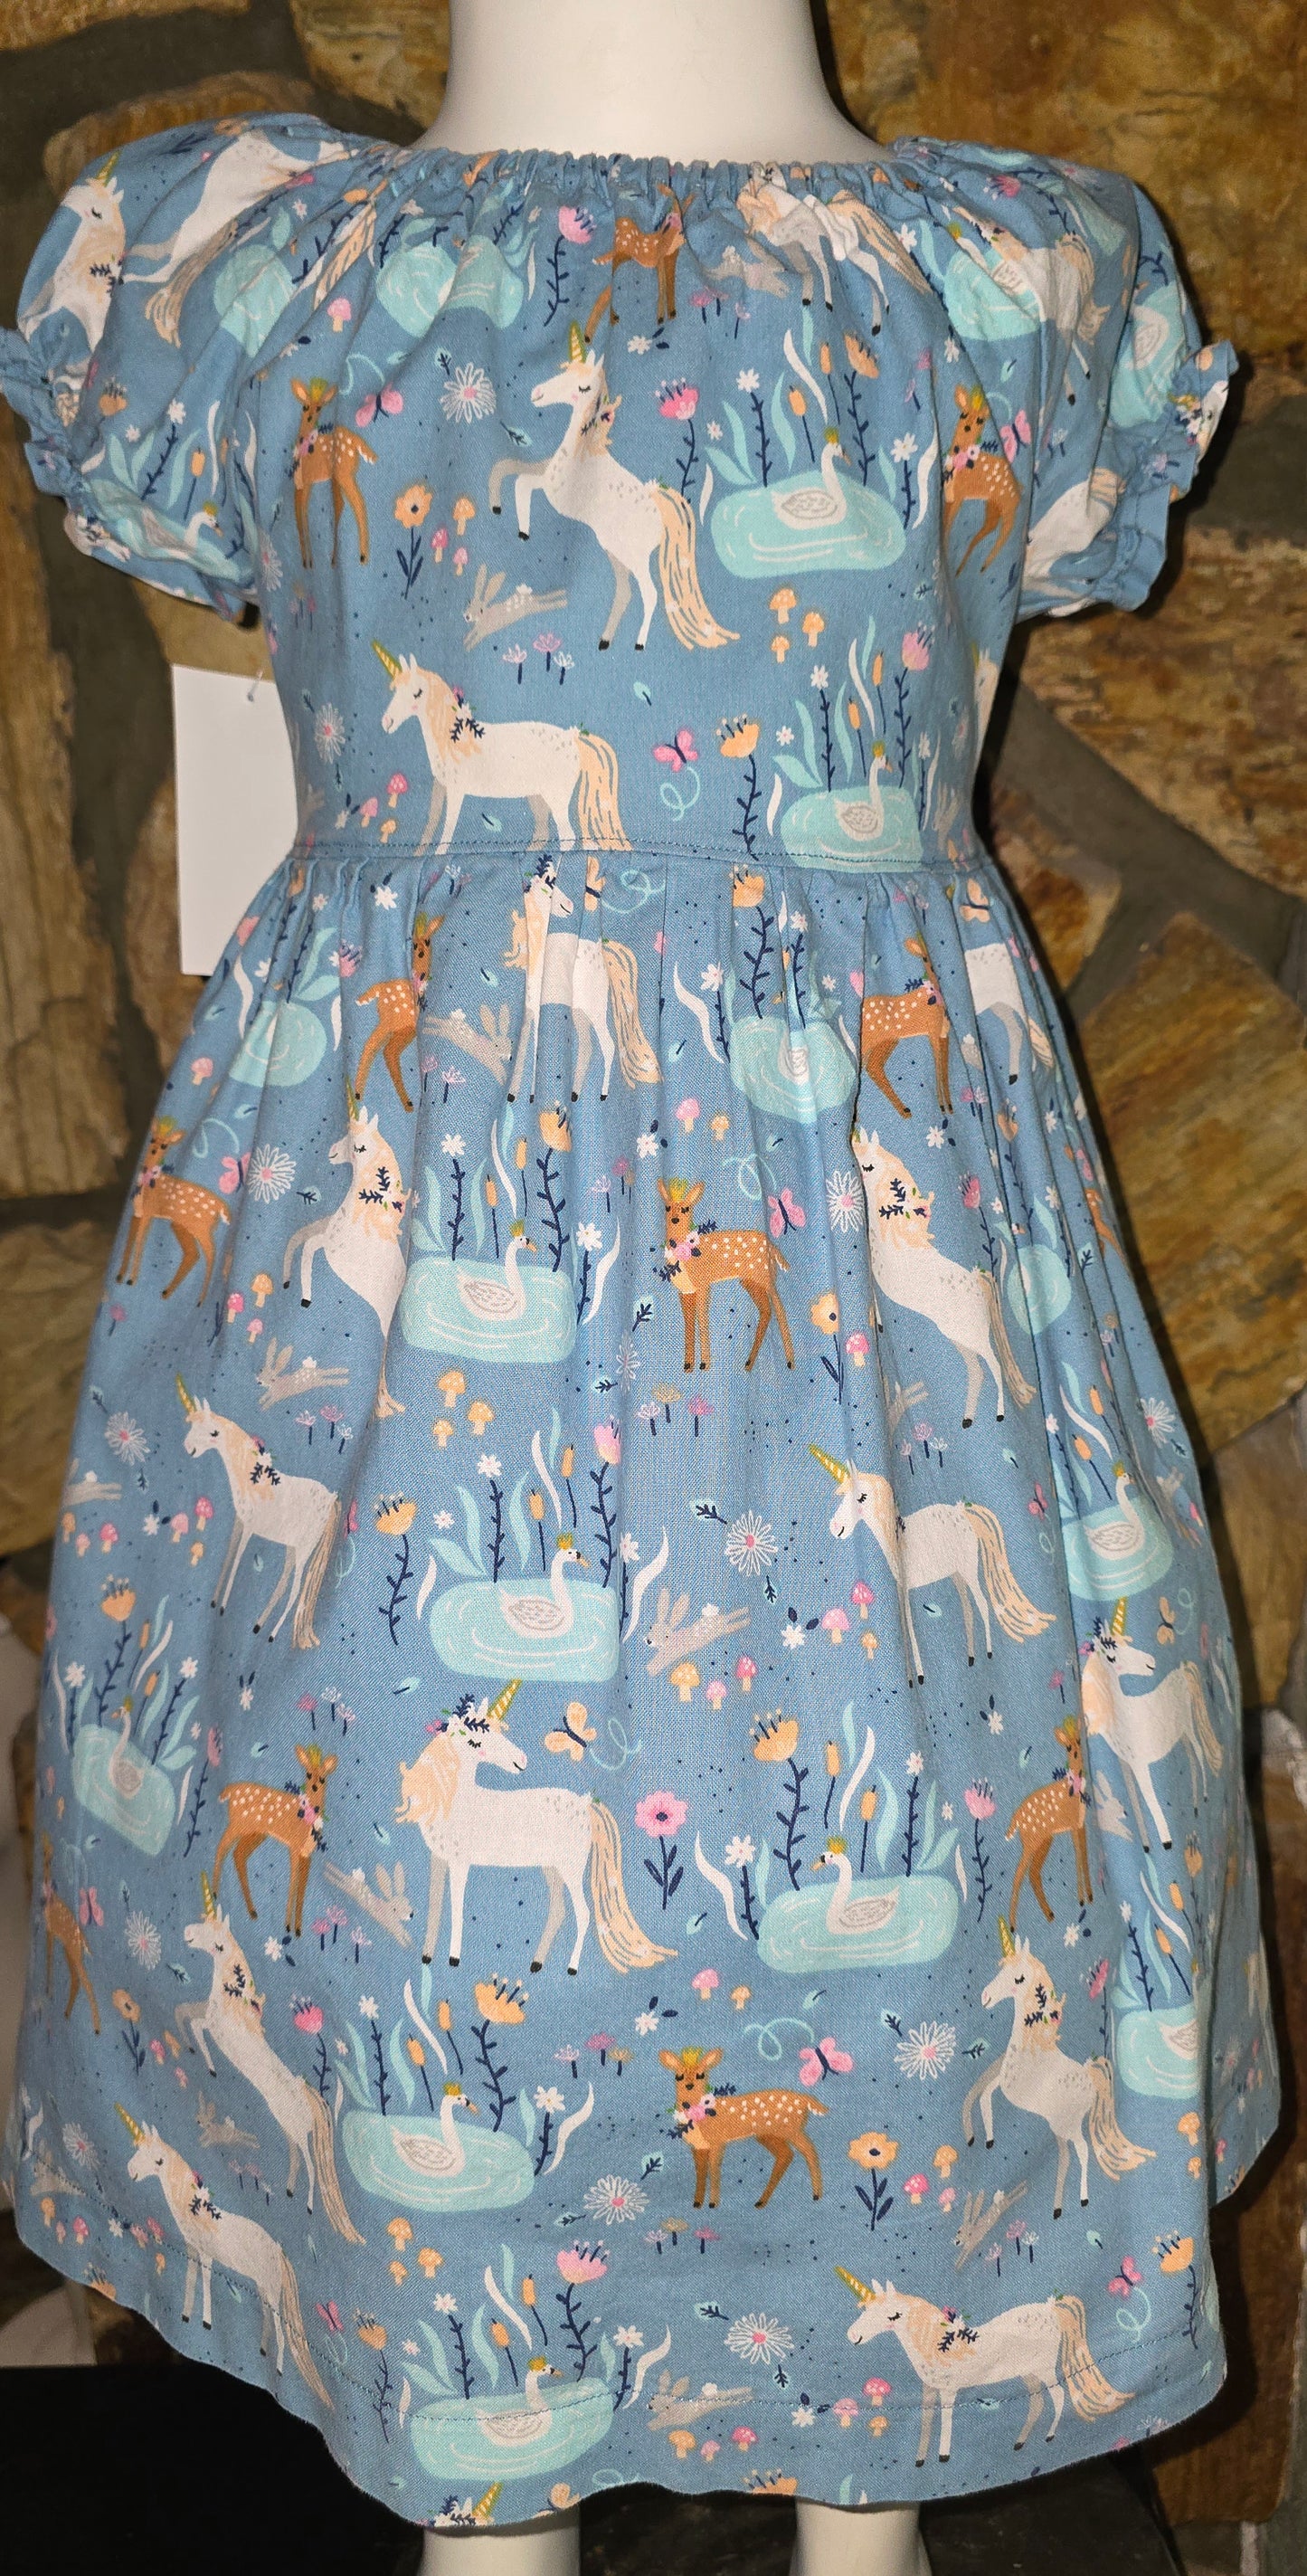 Unicorn and Fawn Whimsical Dress Size 5